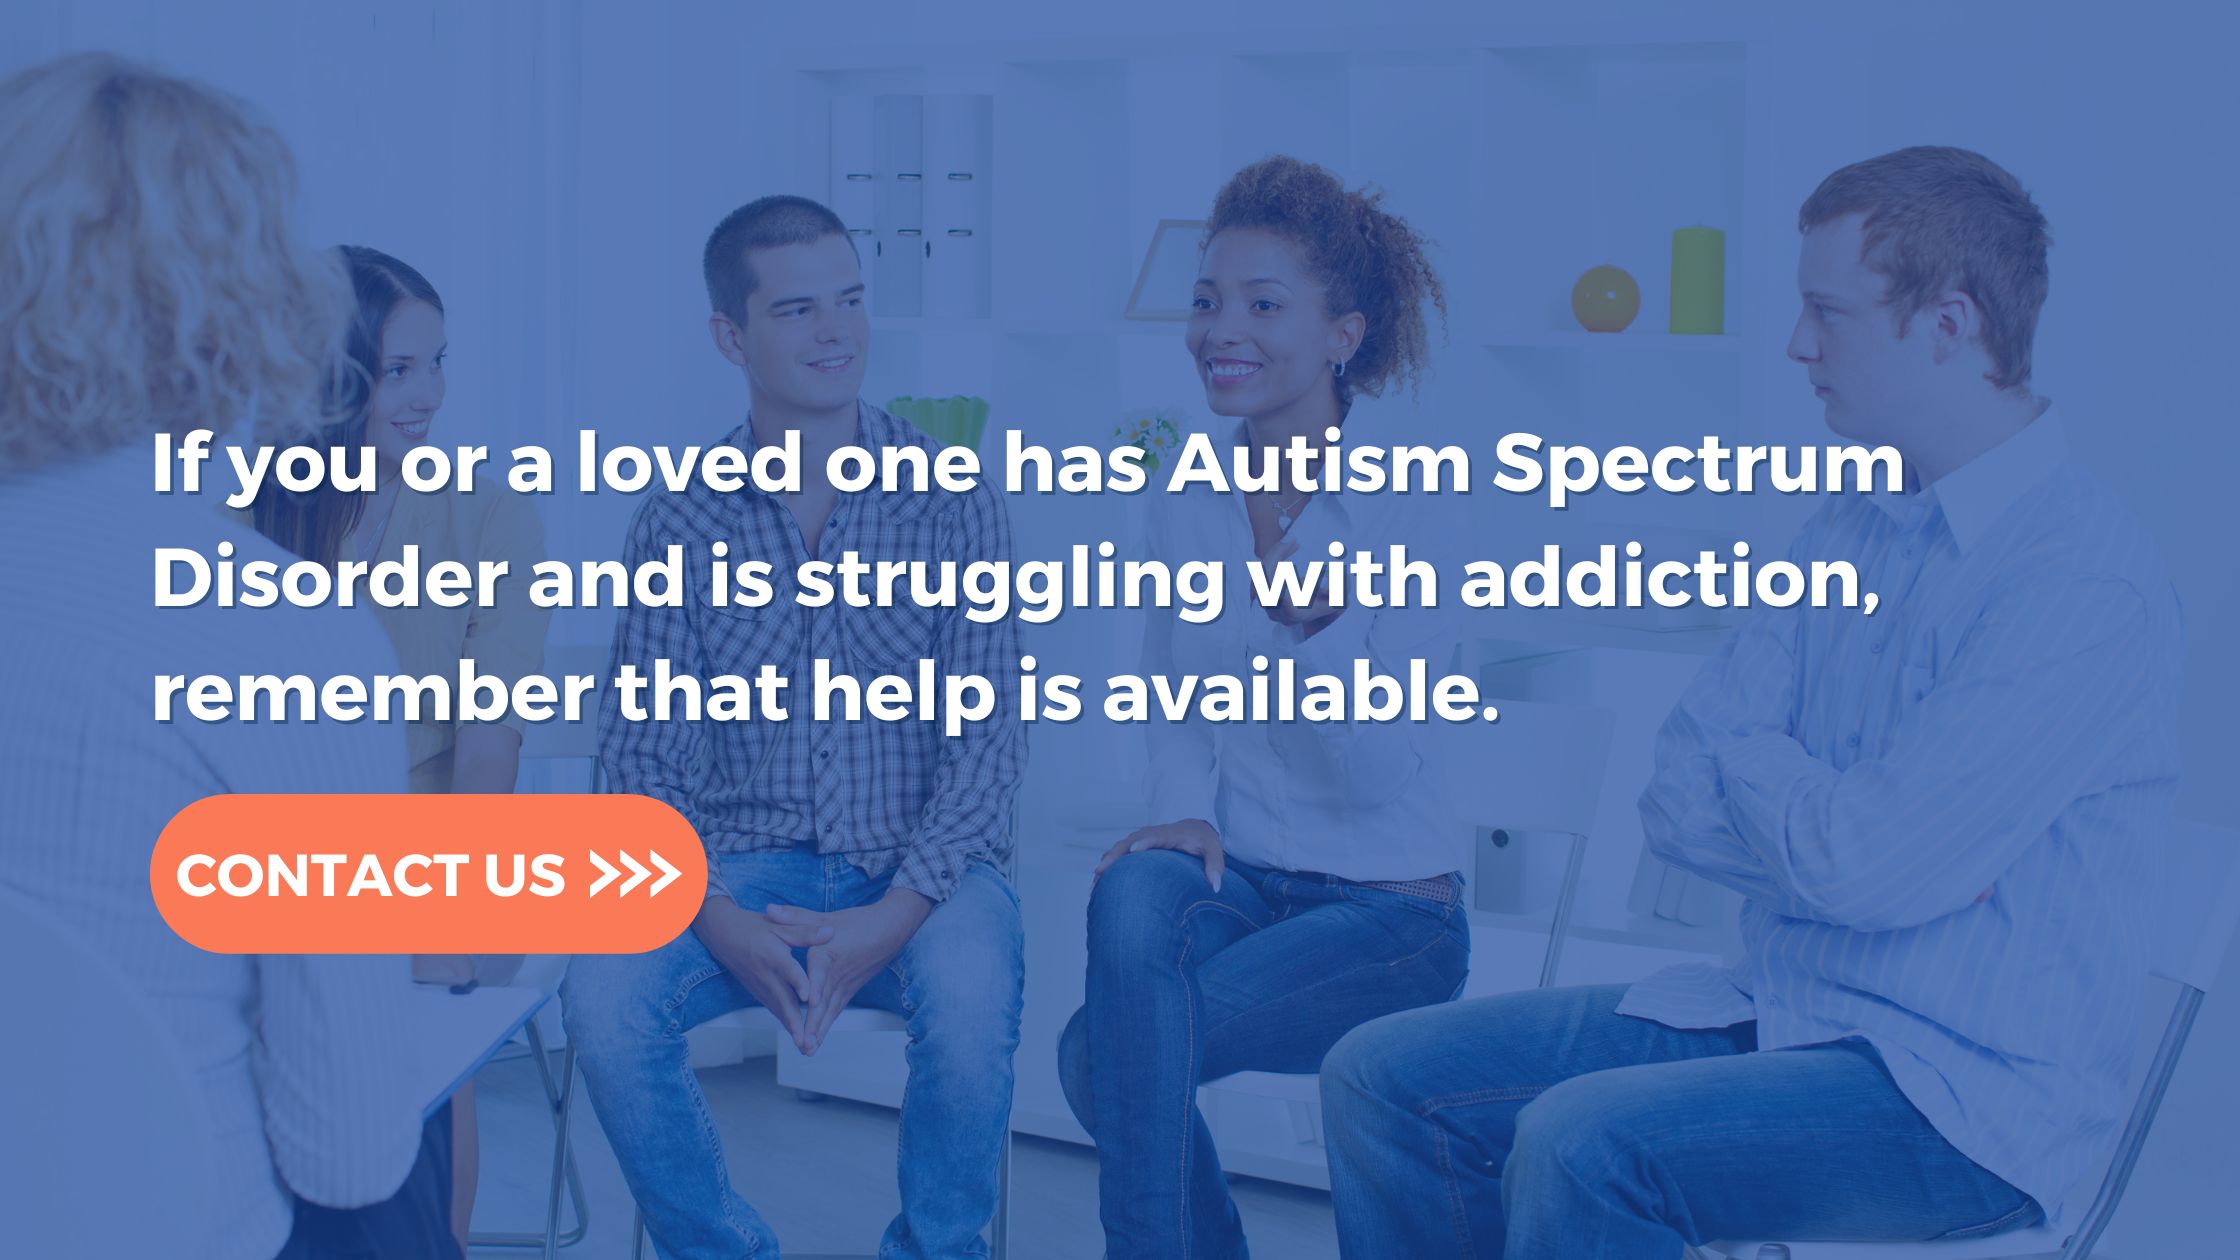 Addiction help for those with Autism at DreamLife Recovery